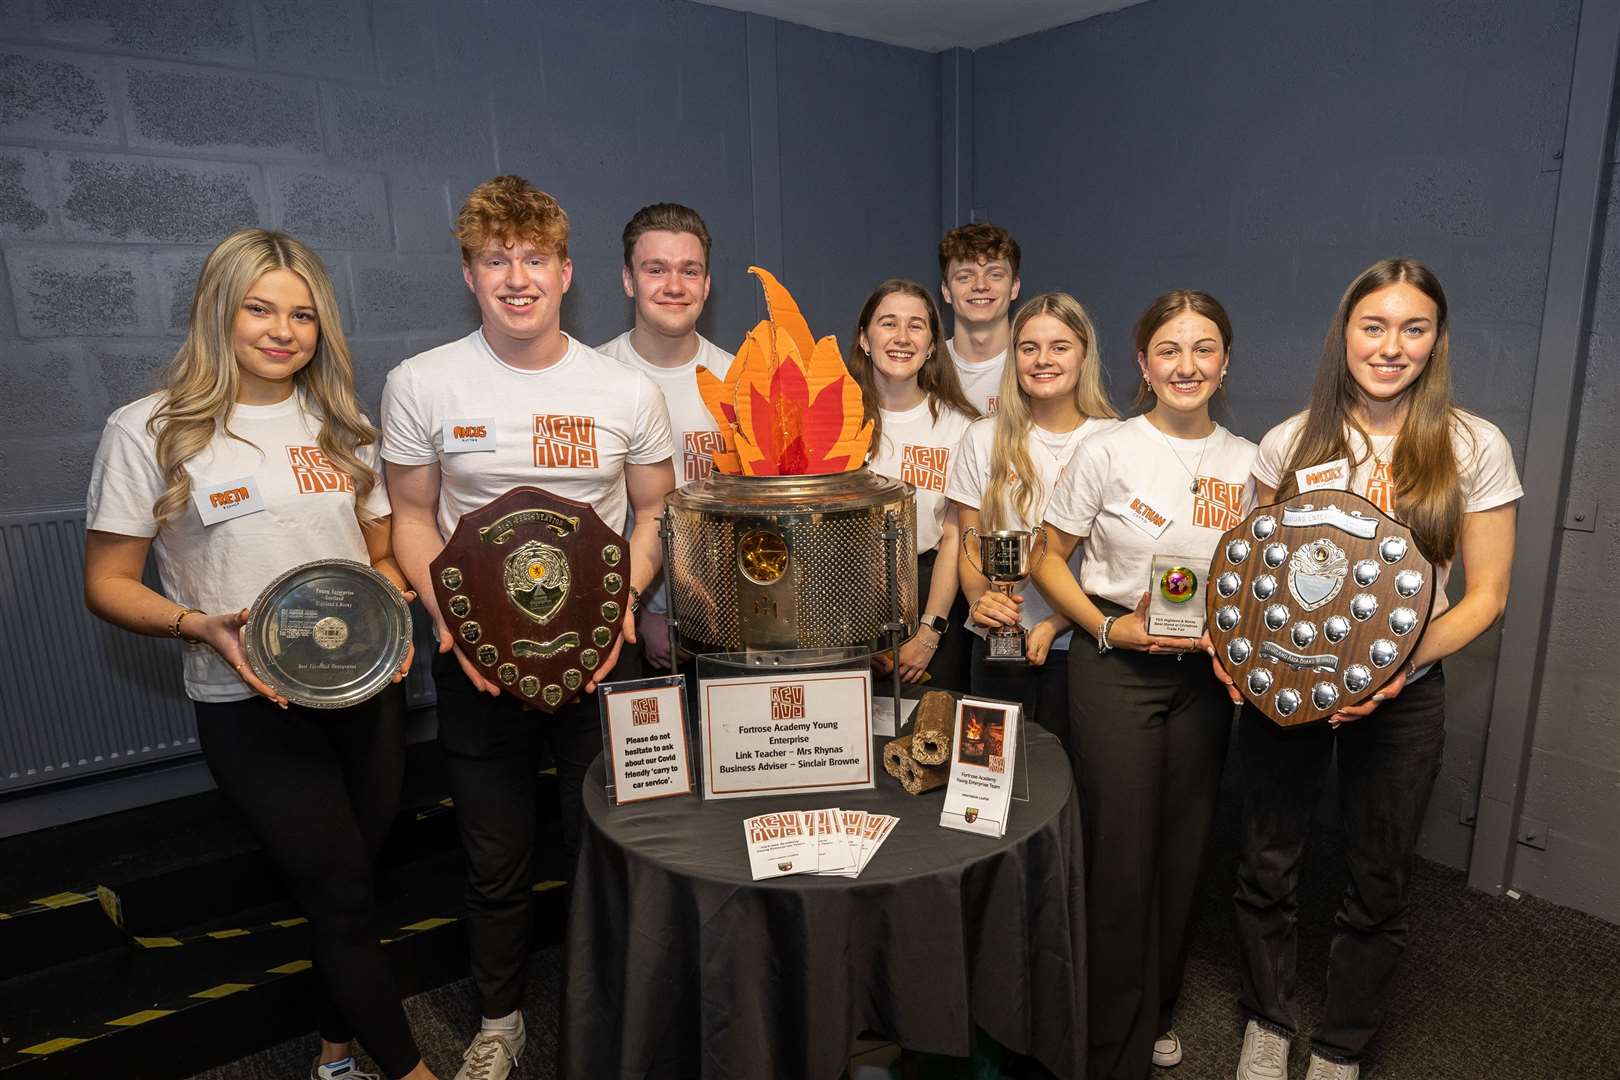 Fortrose Academy's Revive team of (left to right) Freja Bishop, Angus Rutter, Josh Stewart, Ruby Bellshaw, Alasdair Lipp, Rosie Martin, Bethan Catto and Mairi McNaught will now go on to represent Highland and Moray in the national Young Enterprise Scotland final in June.